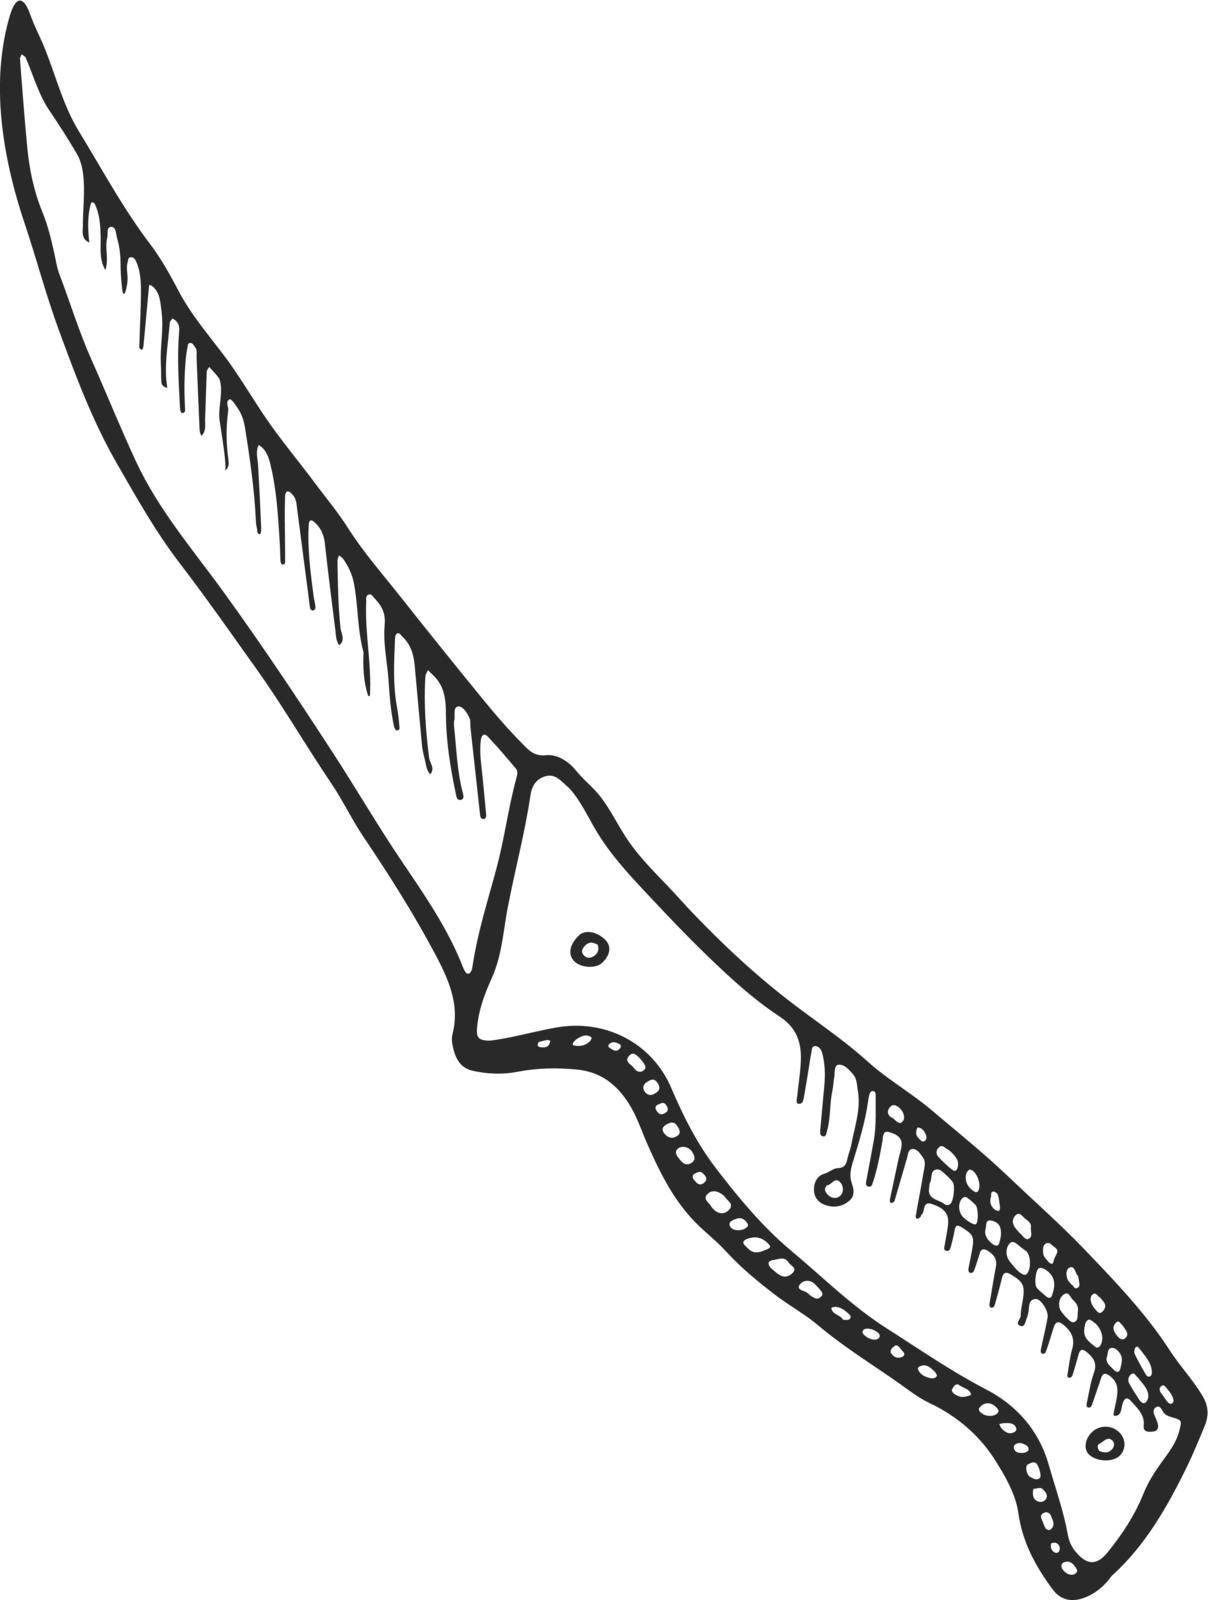 Knife in hand drawn style. Sharp blade kitchen tool by ONYXprj